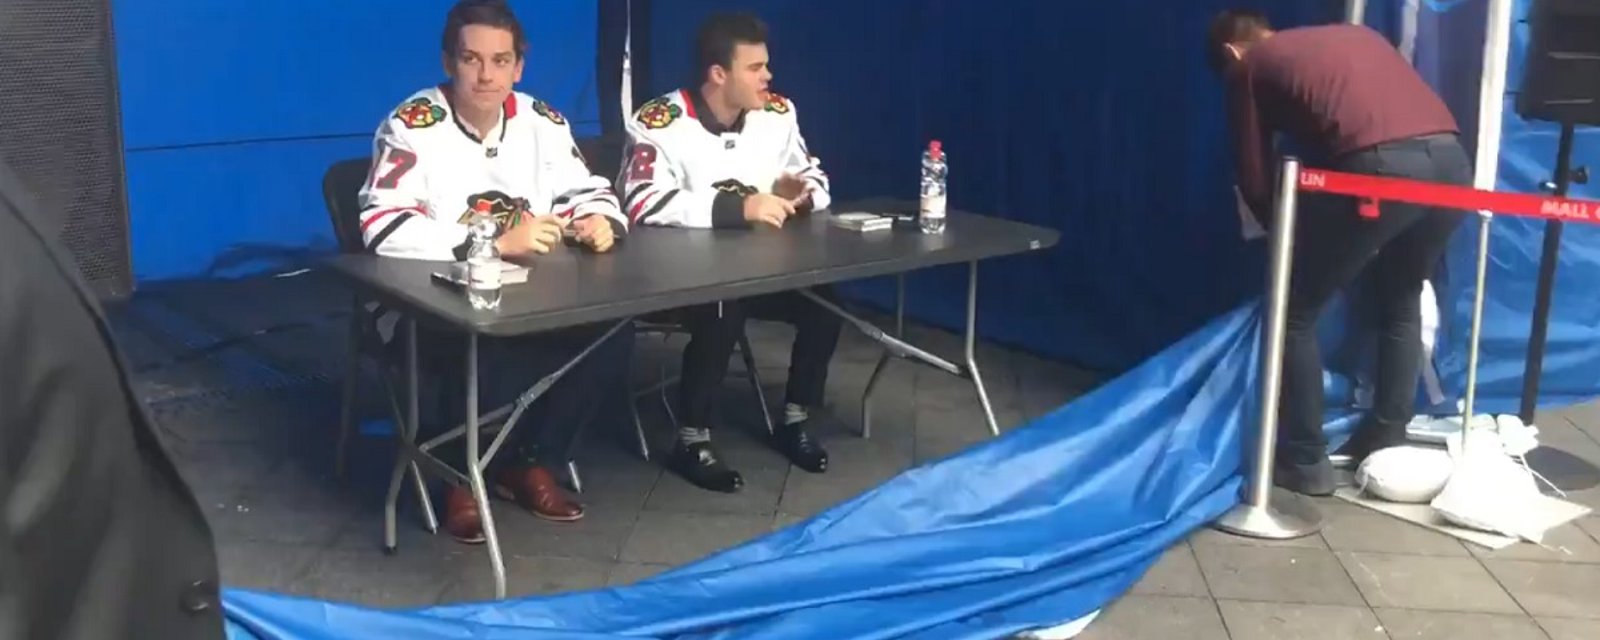 Blackhawks create the most cringeworthy moment of the offseason at the Mall of Berlin.